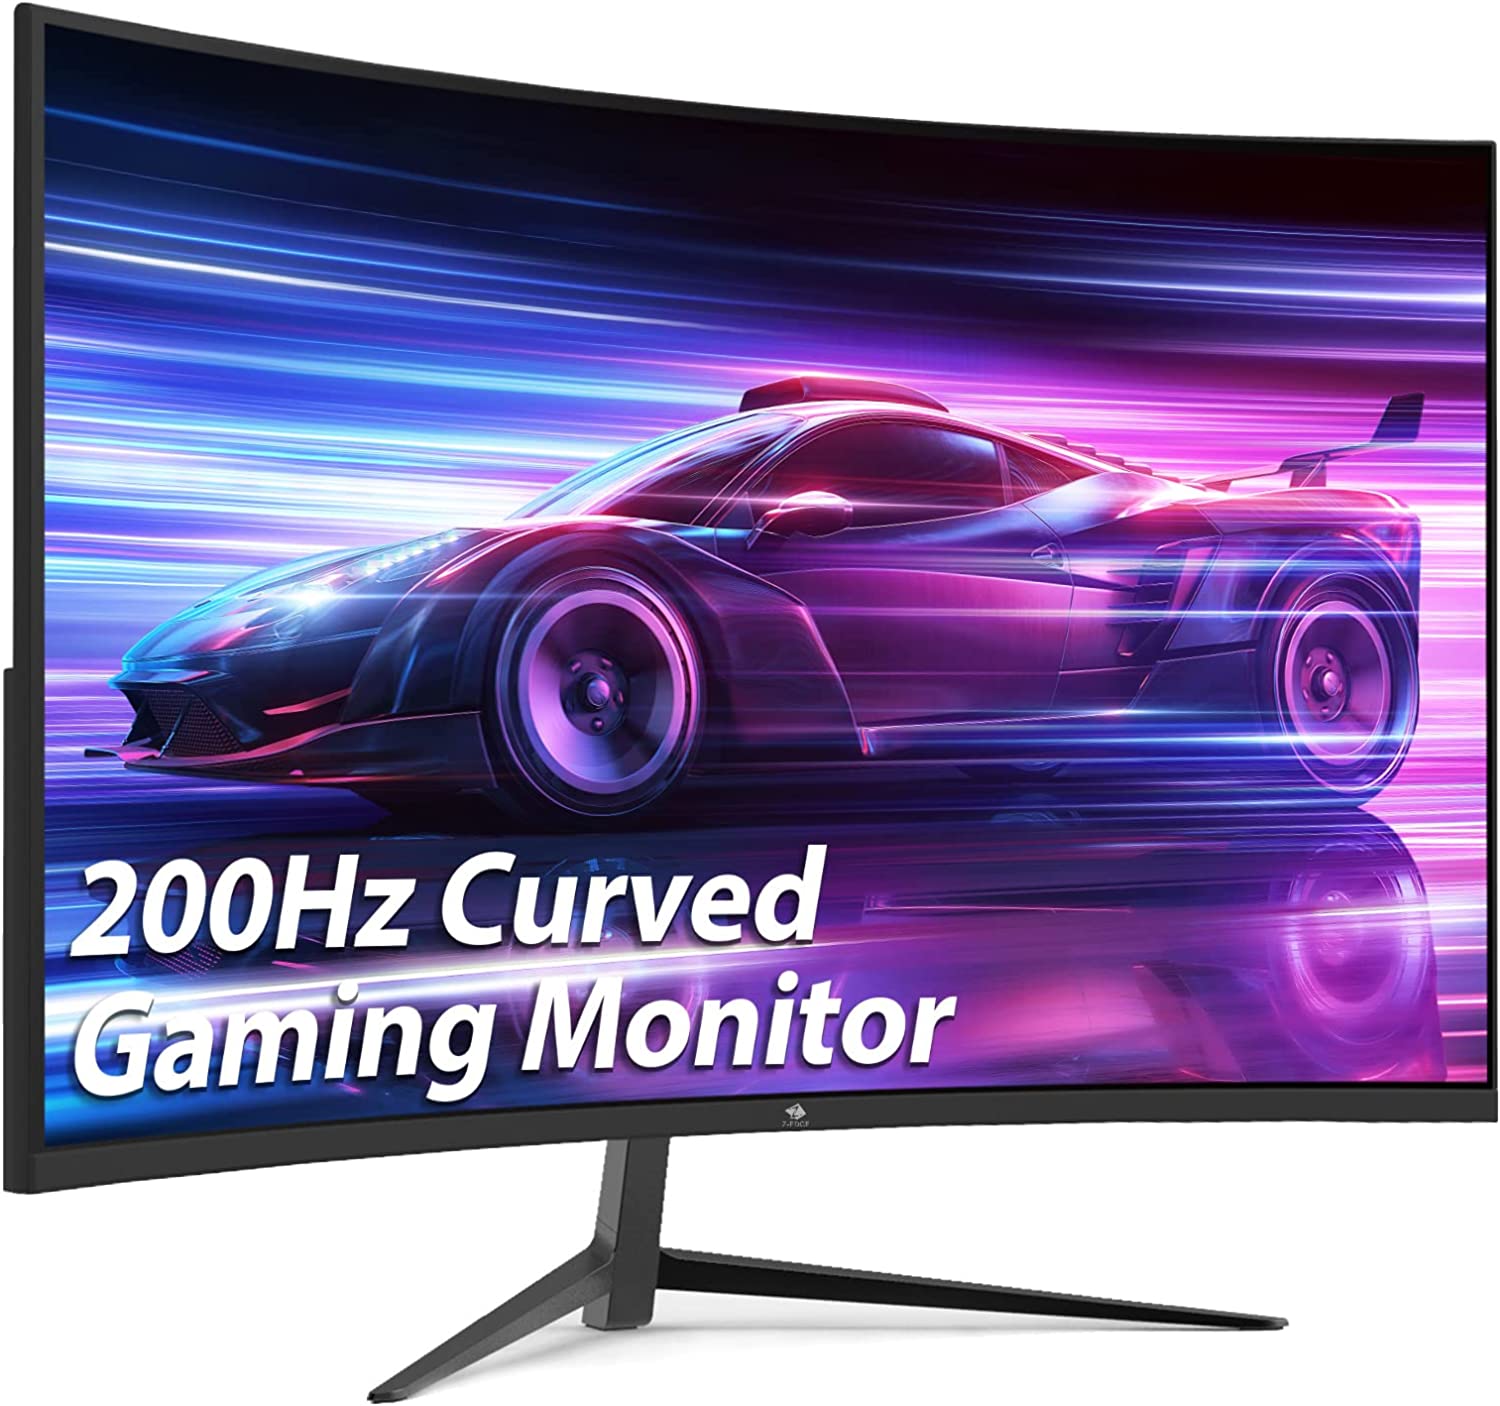 Z-Edge UG27 27-Inch Curved Gaming Monitor